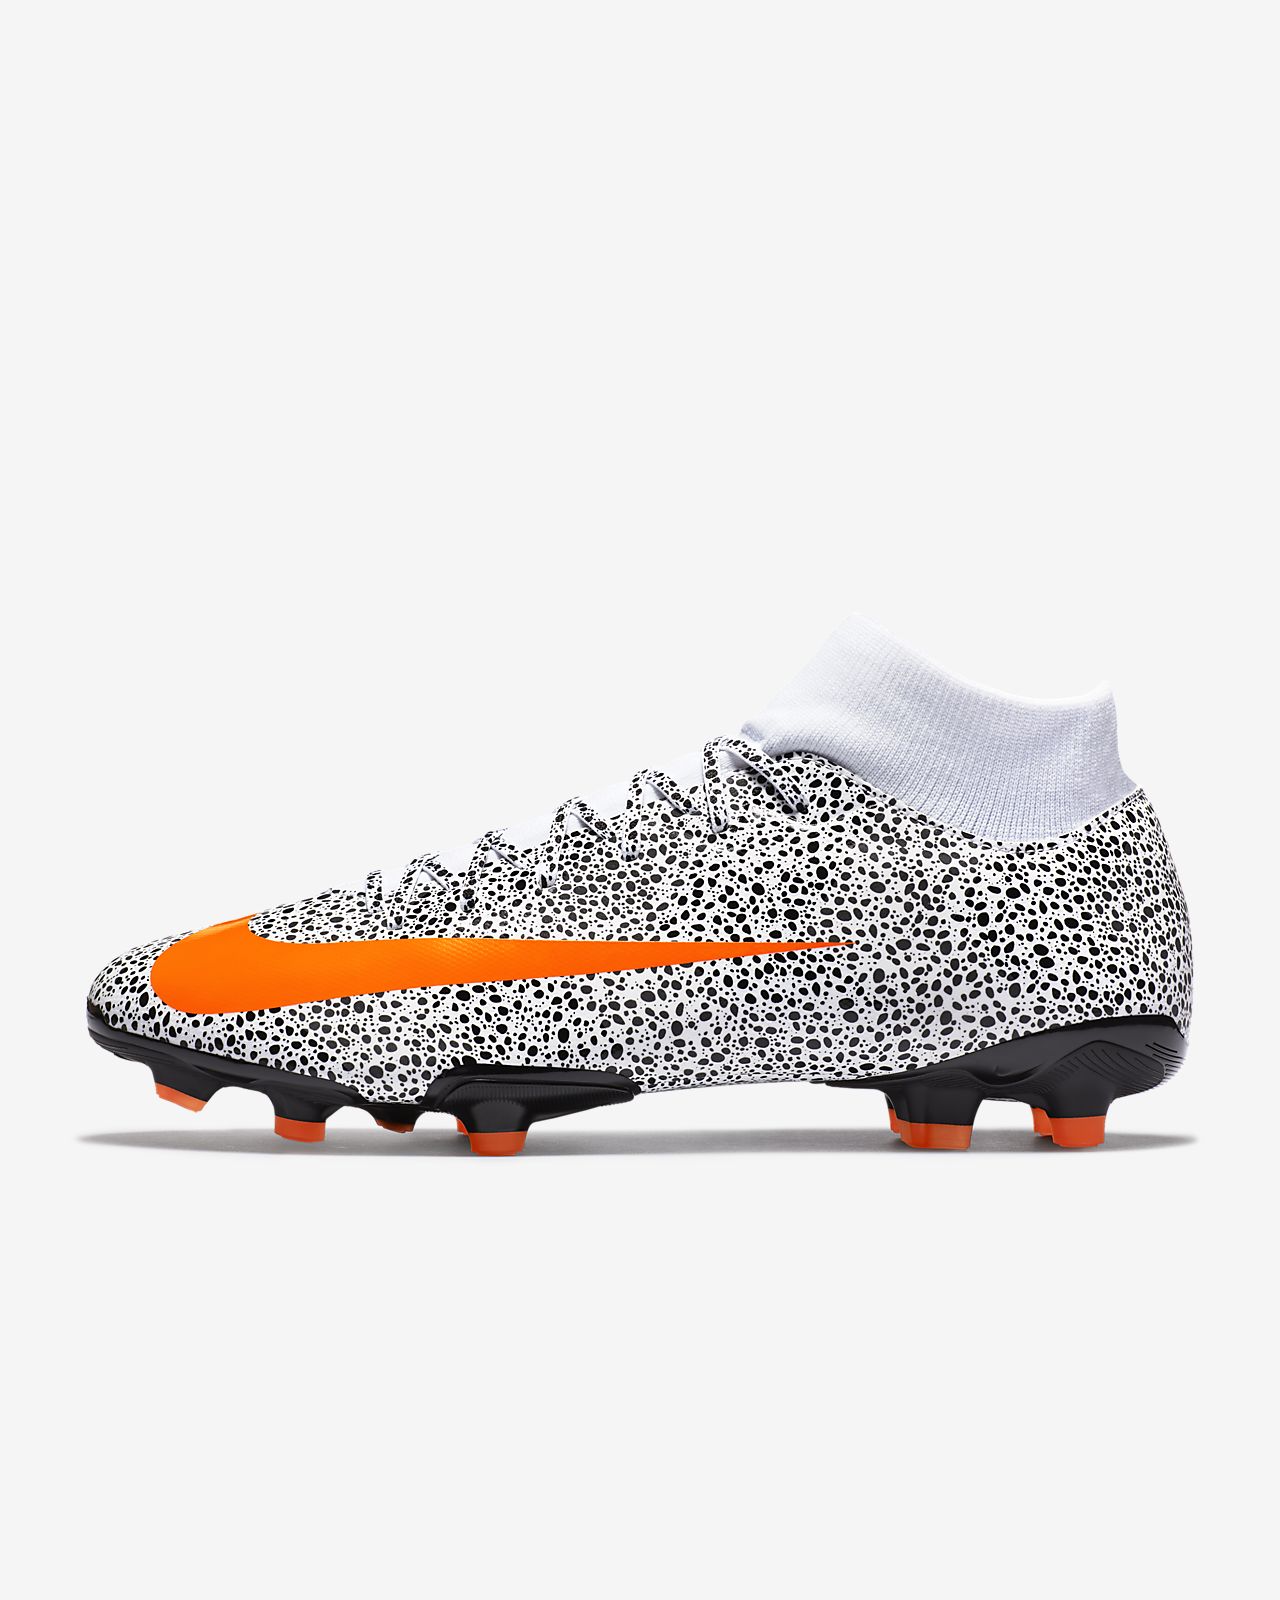 Football Boots Nike Mercurial Superfly VII Academy SG PRO.